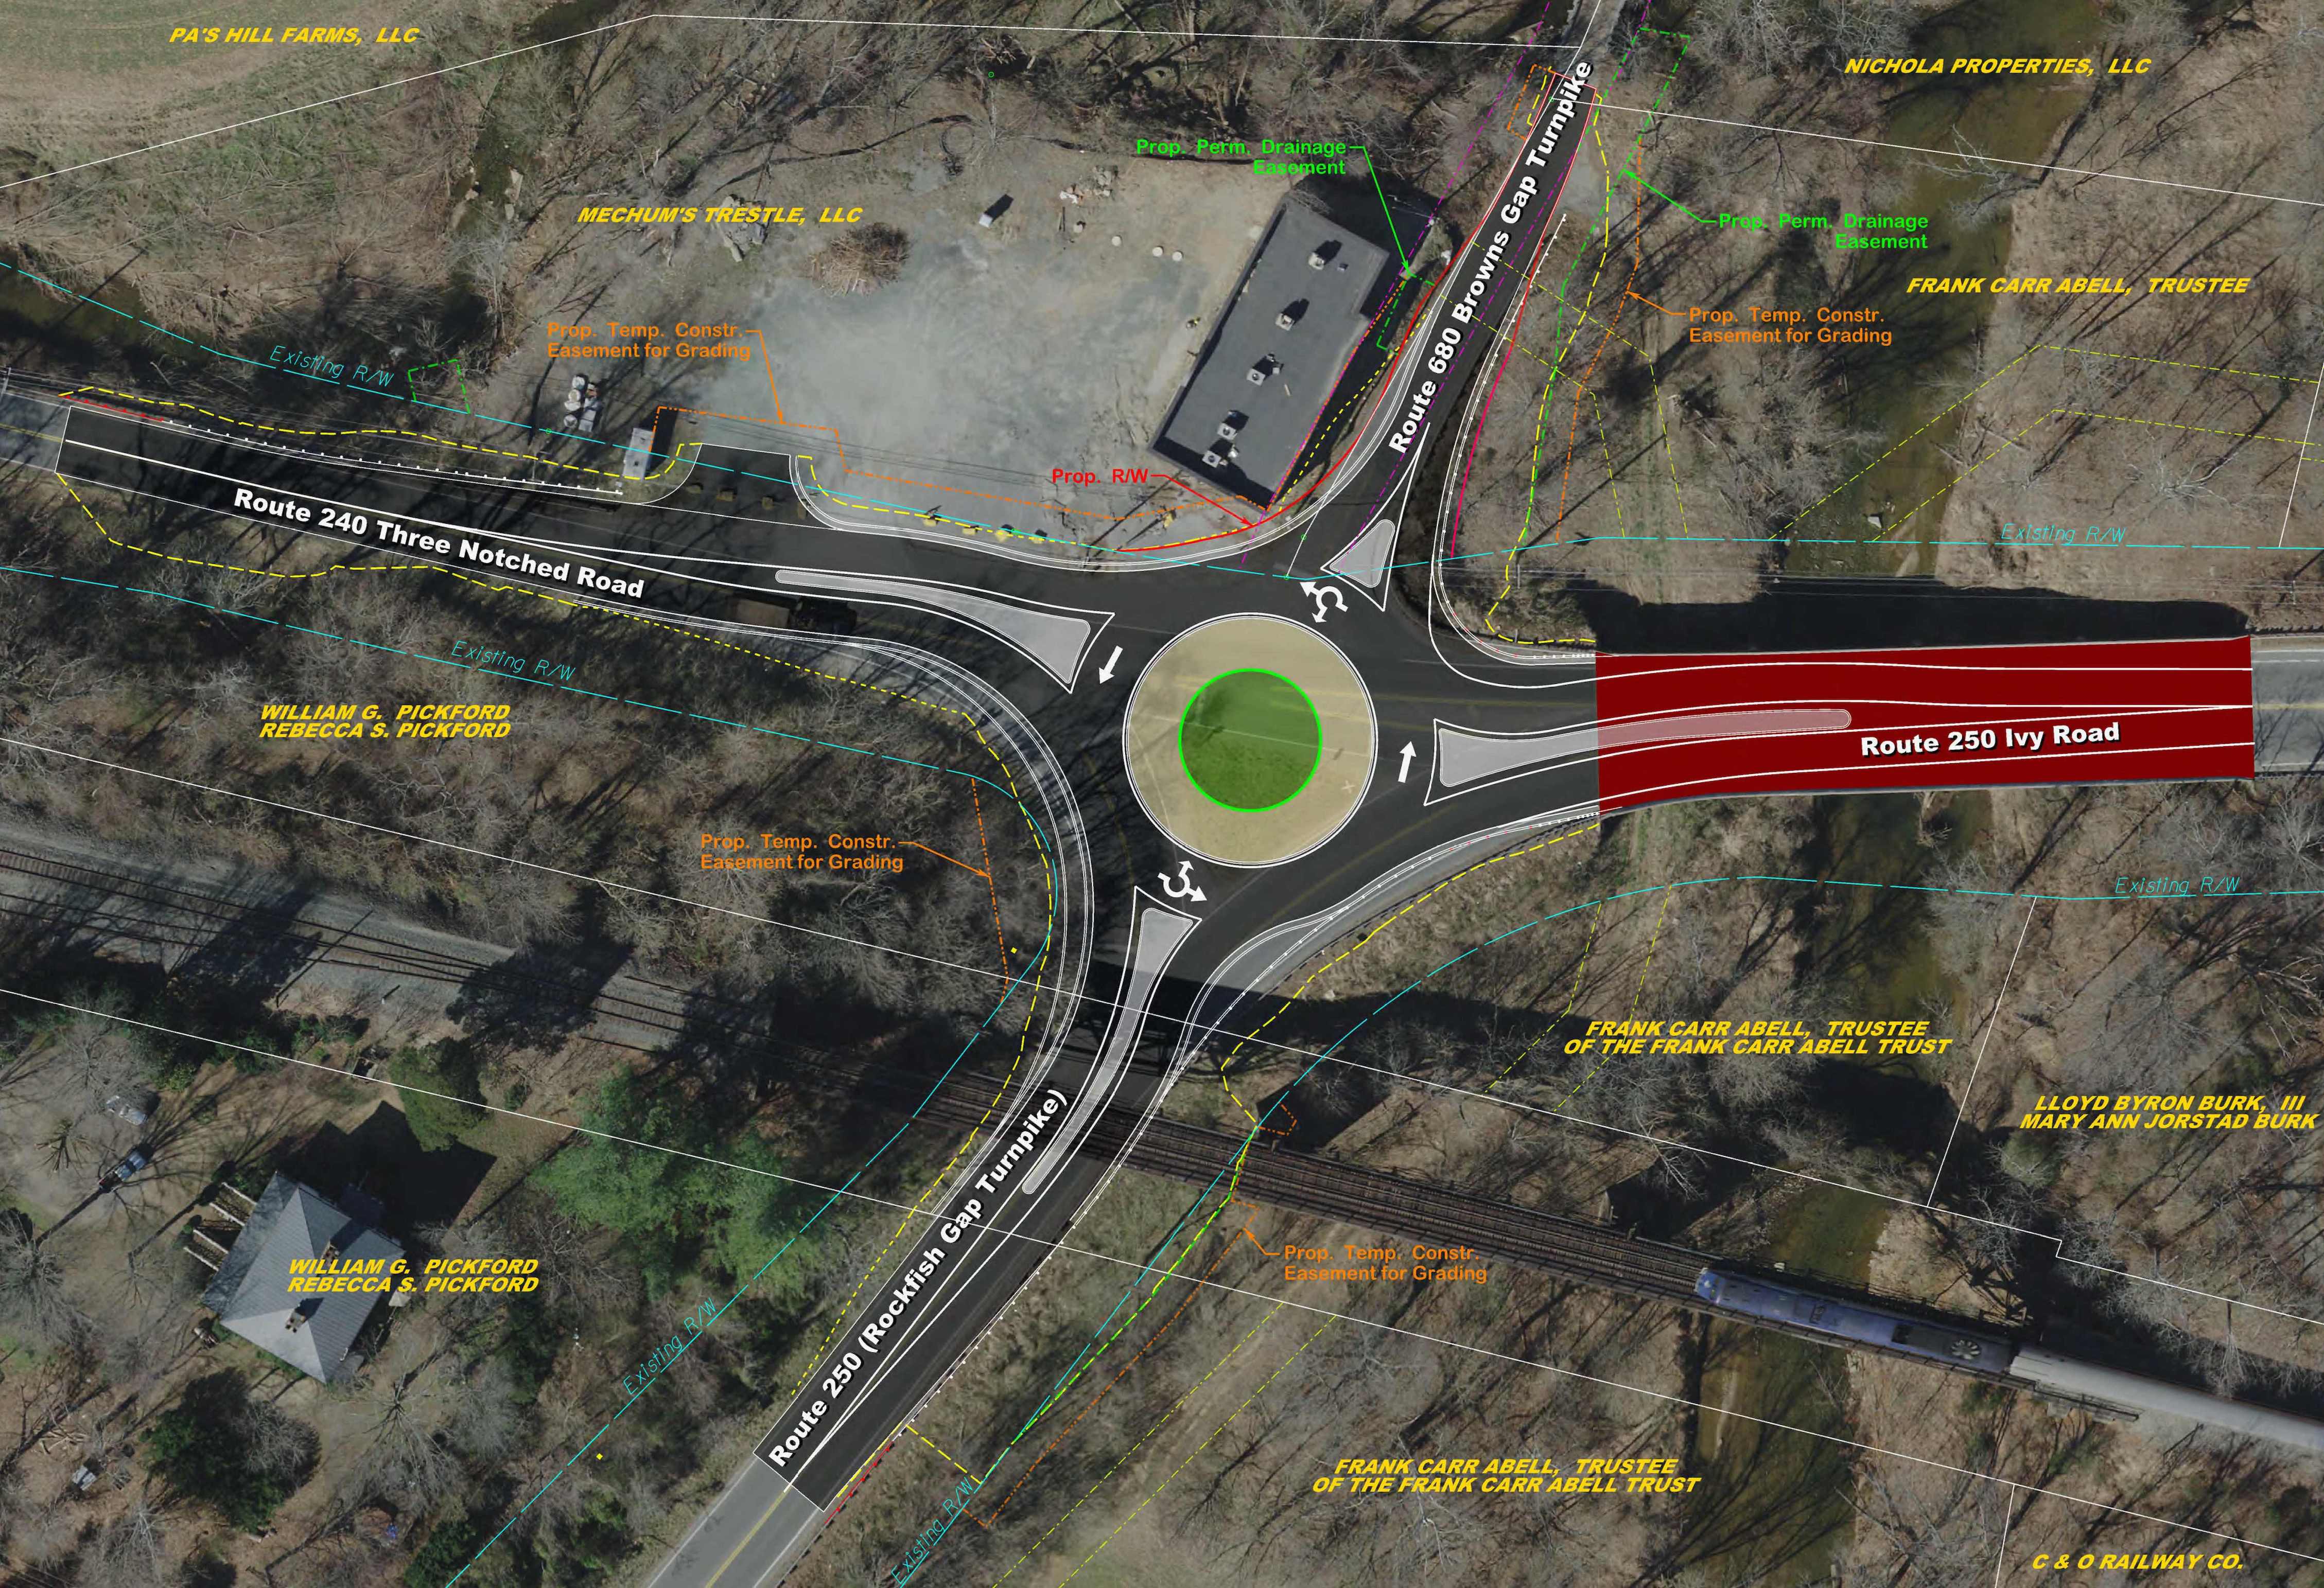 Proposed roundabout at Routes 240/250/680 intersection